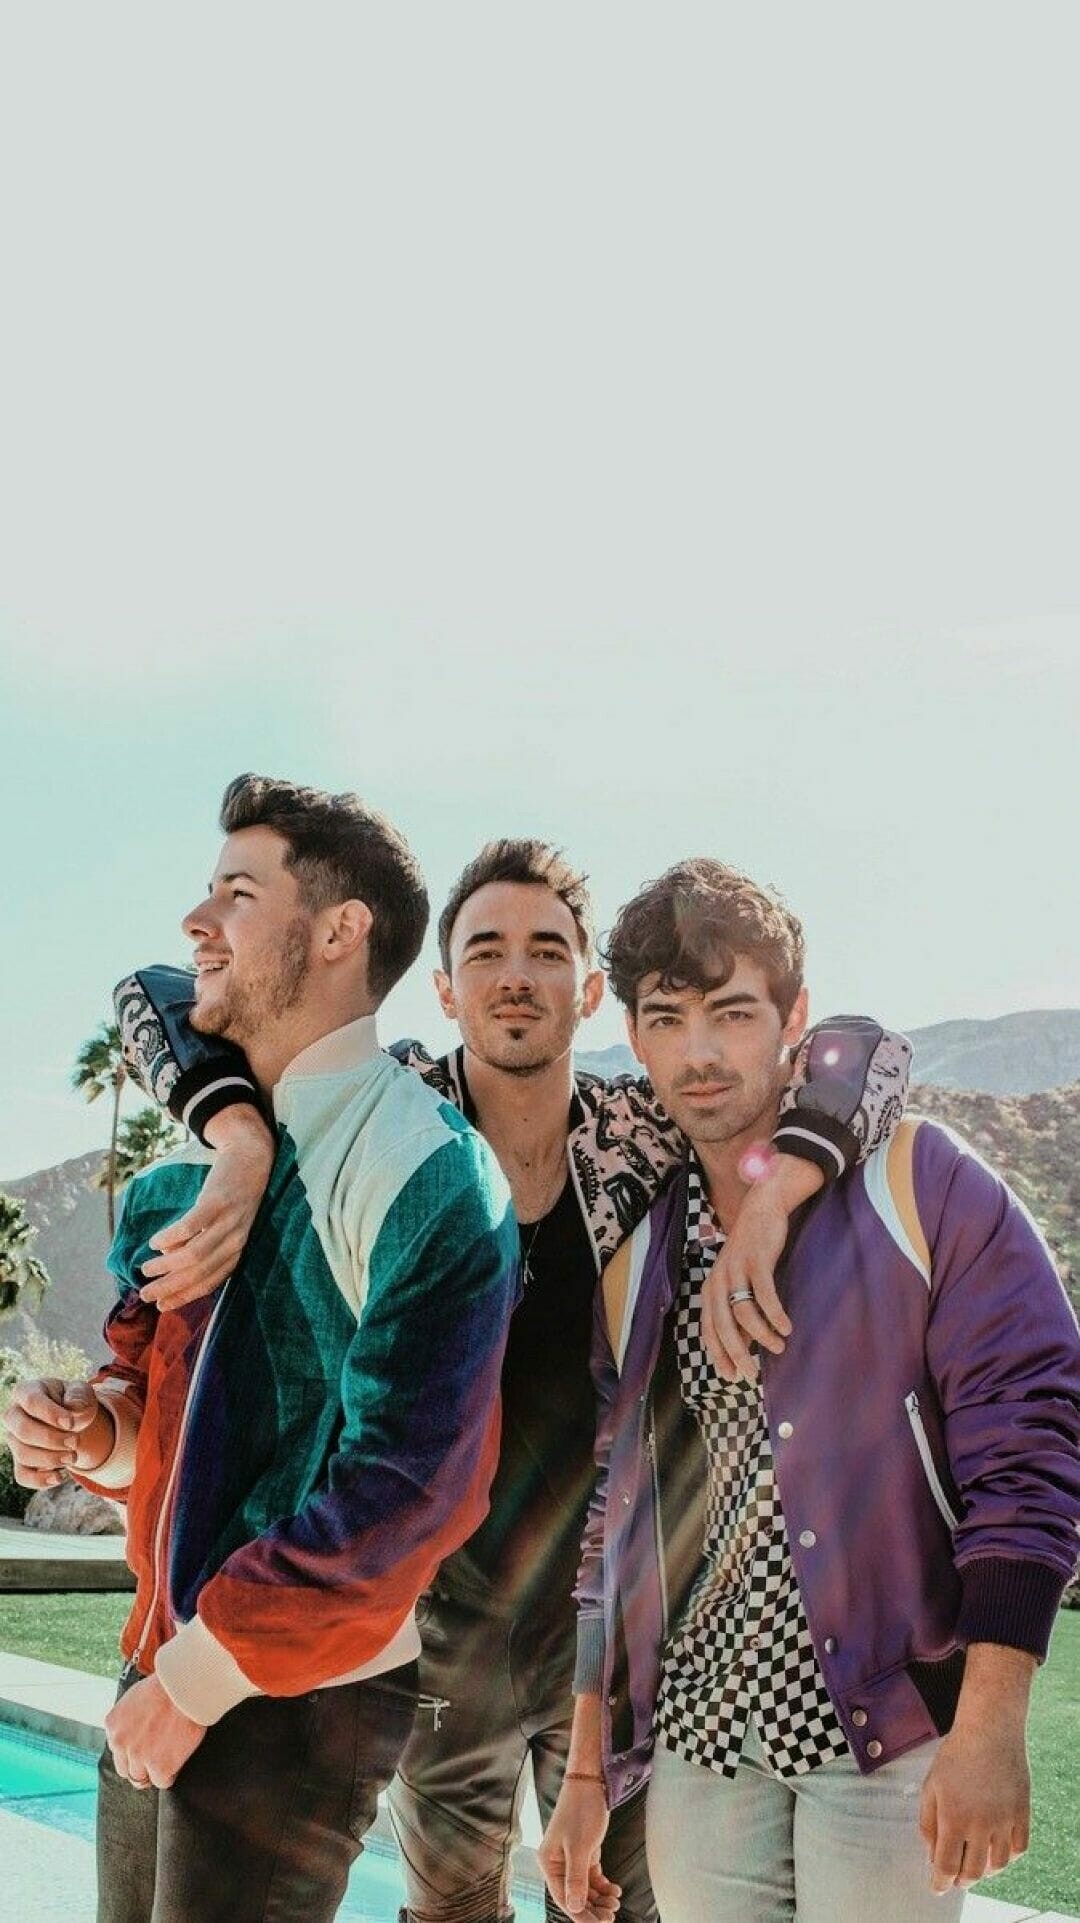 Jonas Brothers: "Paranoid" was released as the lead single on May 12, 2009. 1080x1930 HD Wallpaper.